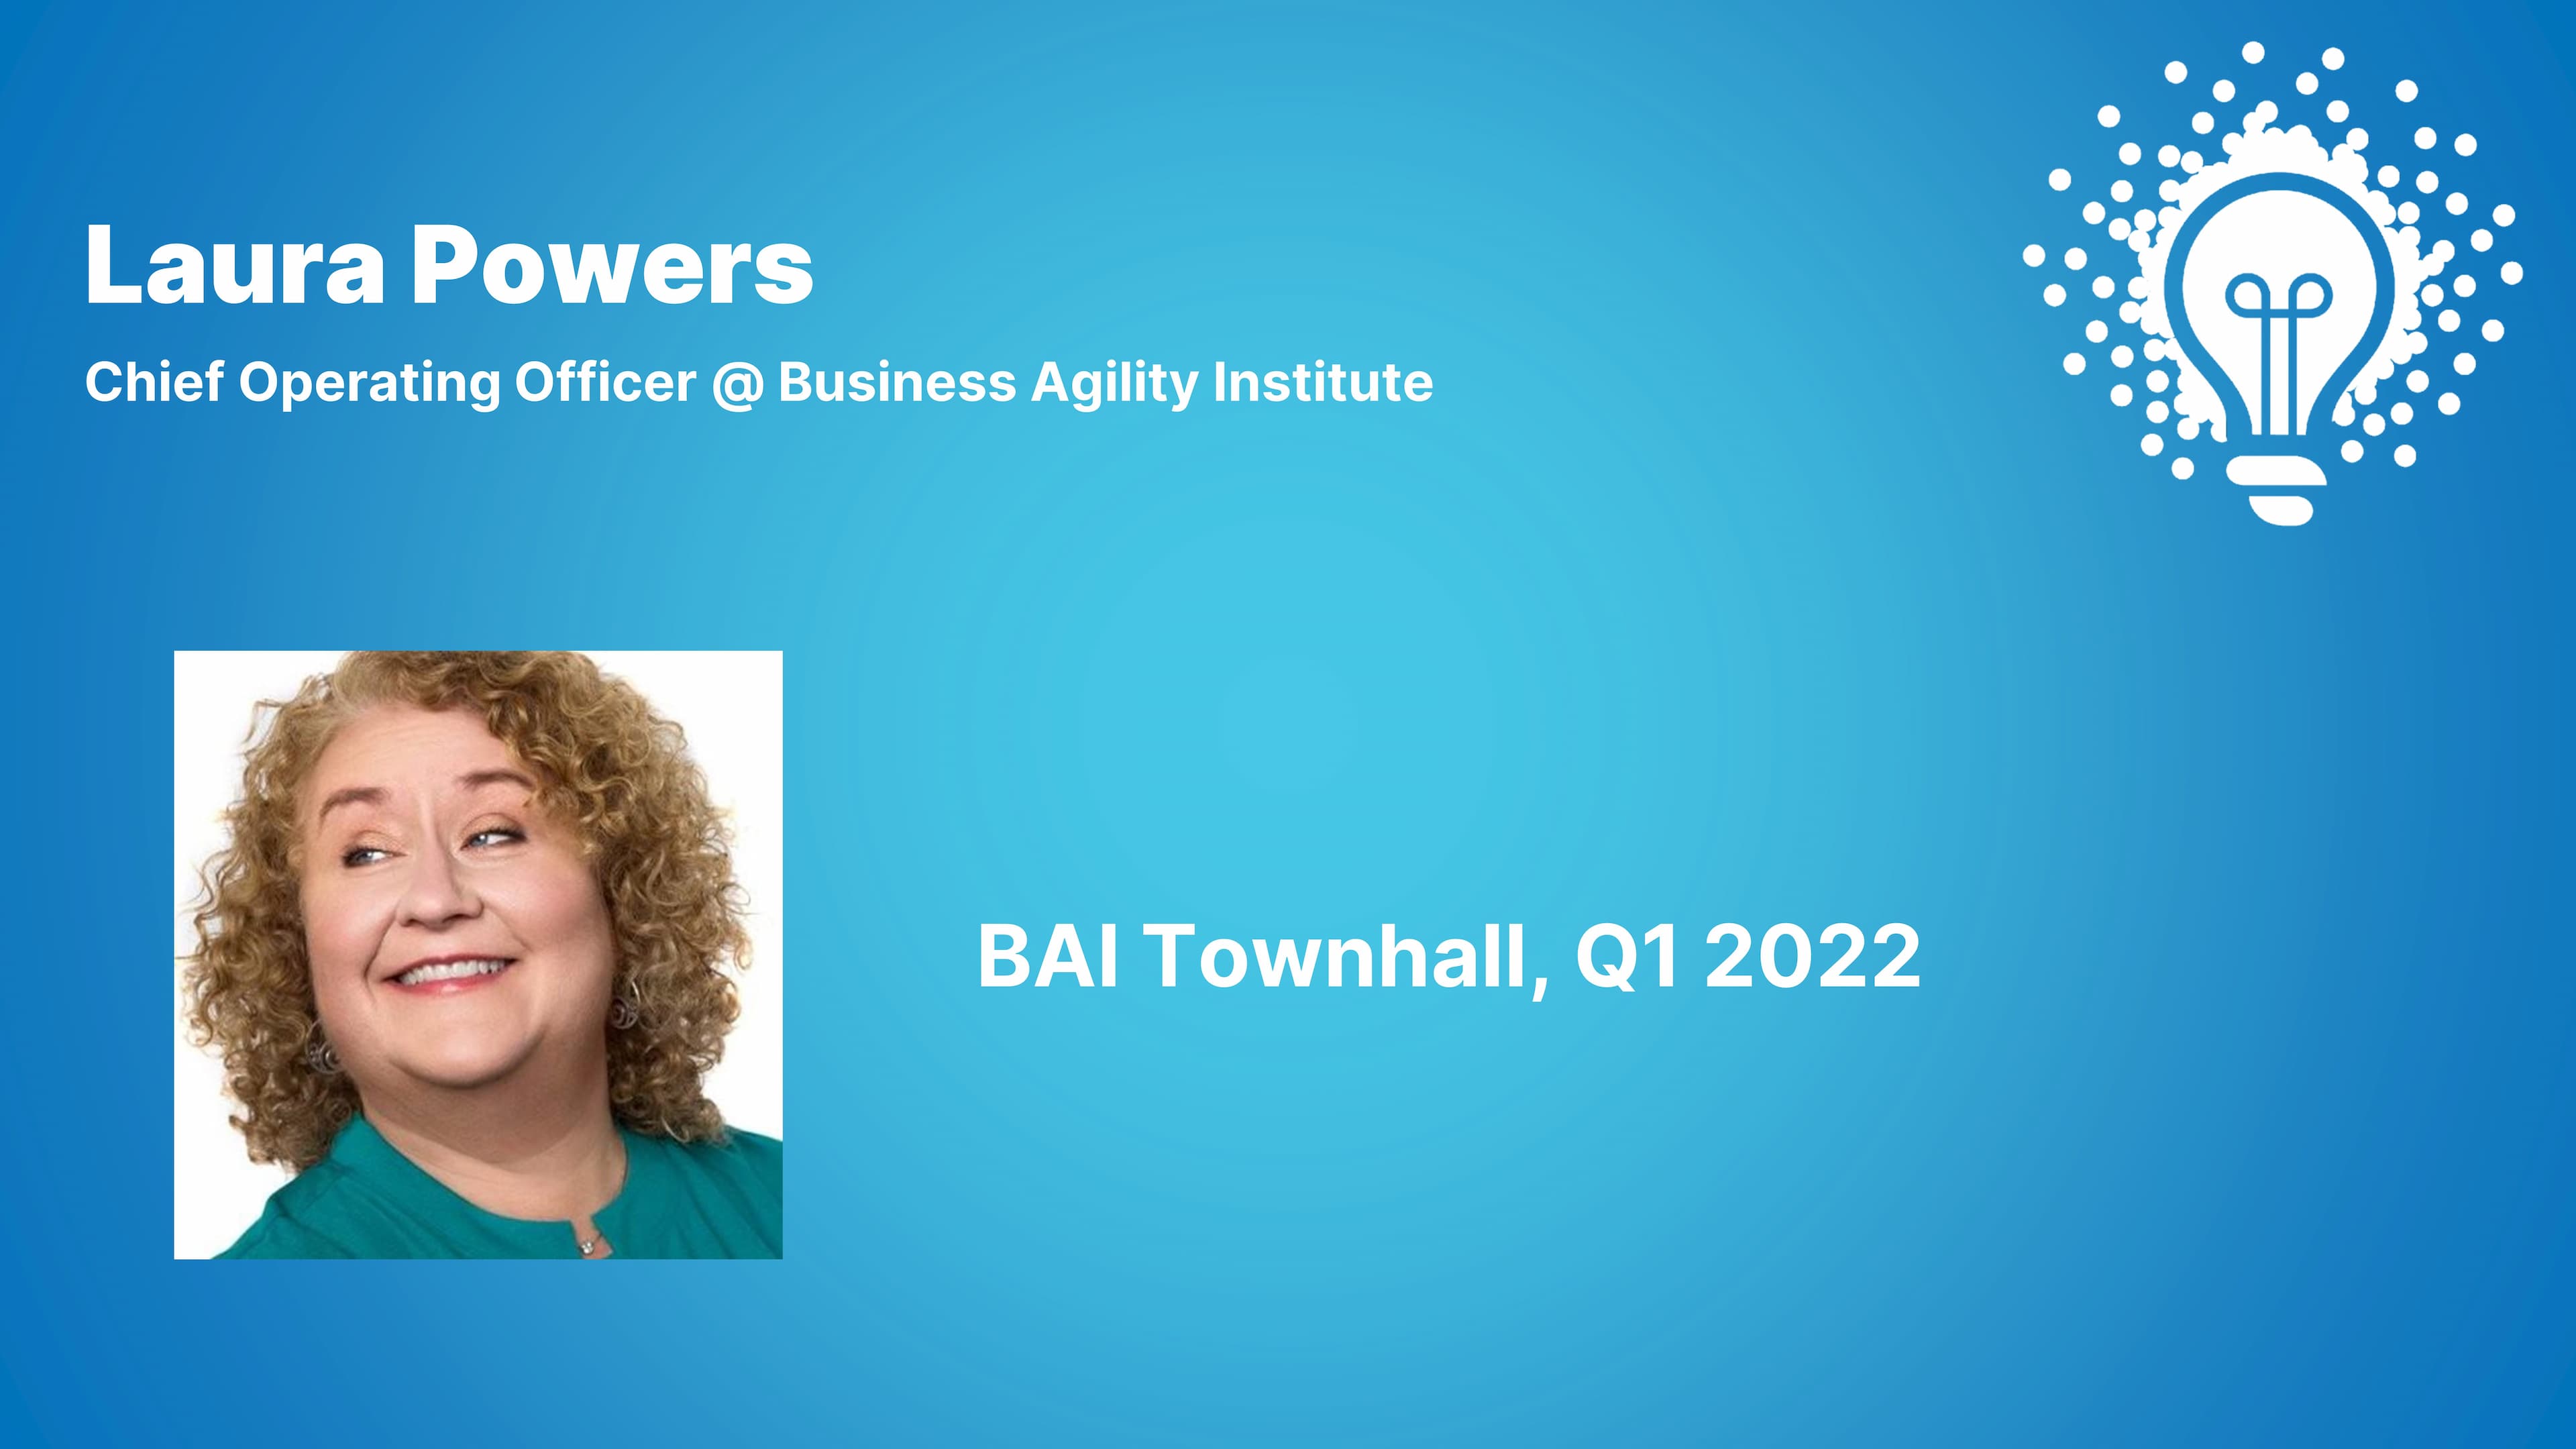 Townhall Update on Business Agility Institute